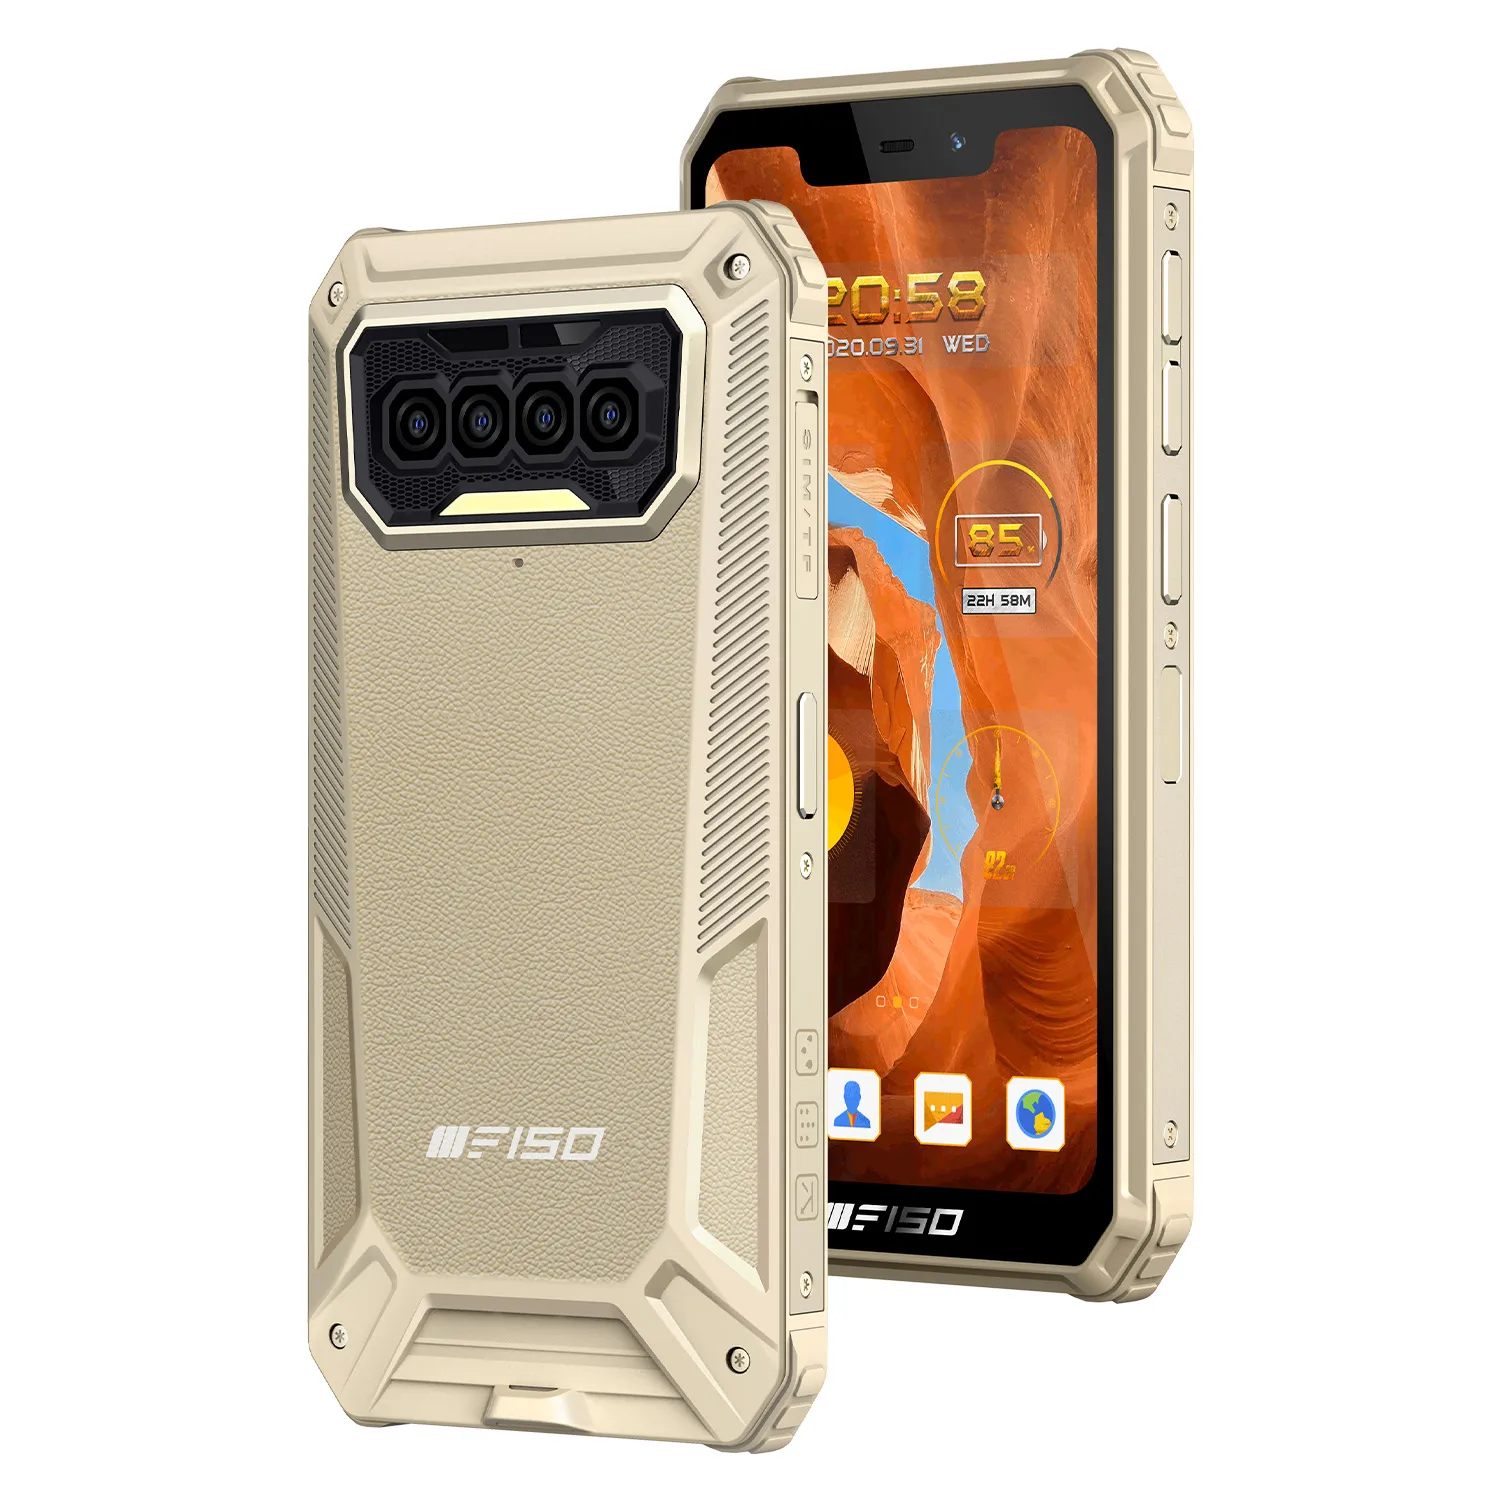 

Low Price OUKITEL F150 B2021 IP68 SmartPhone 6GB+64GB 8000mAh Octa Core cell phone NFC support rugged Mobile Phones